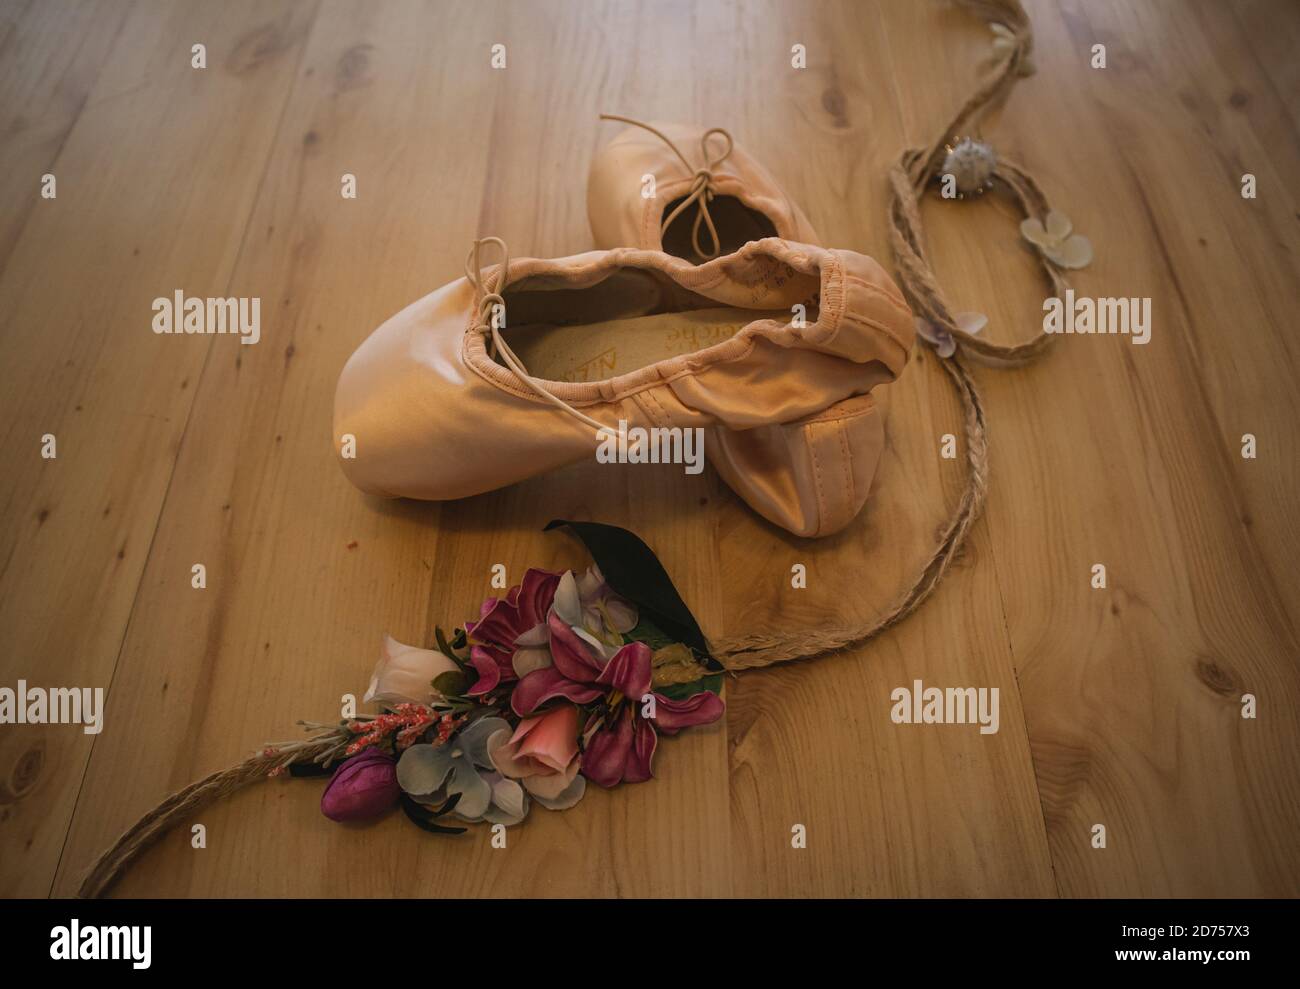 Exhibition of Ballet clothes and outfits Stock Photo